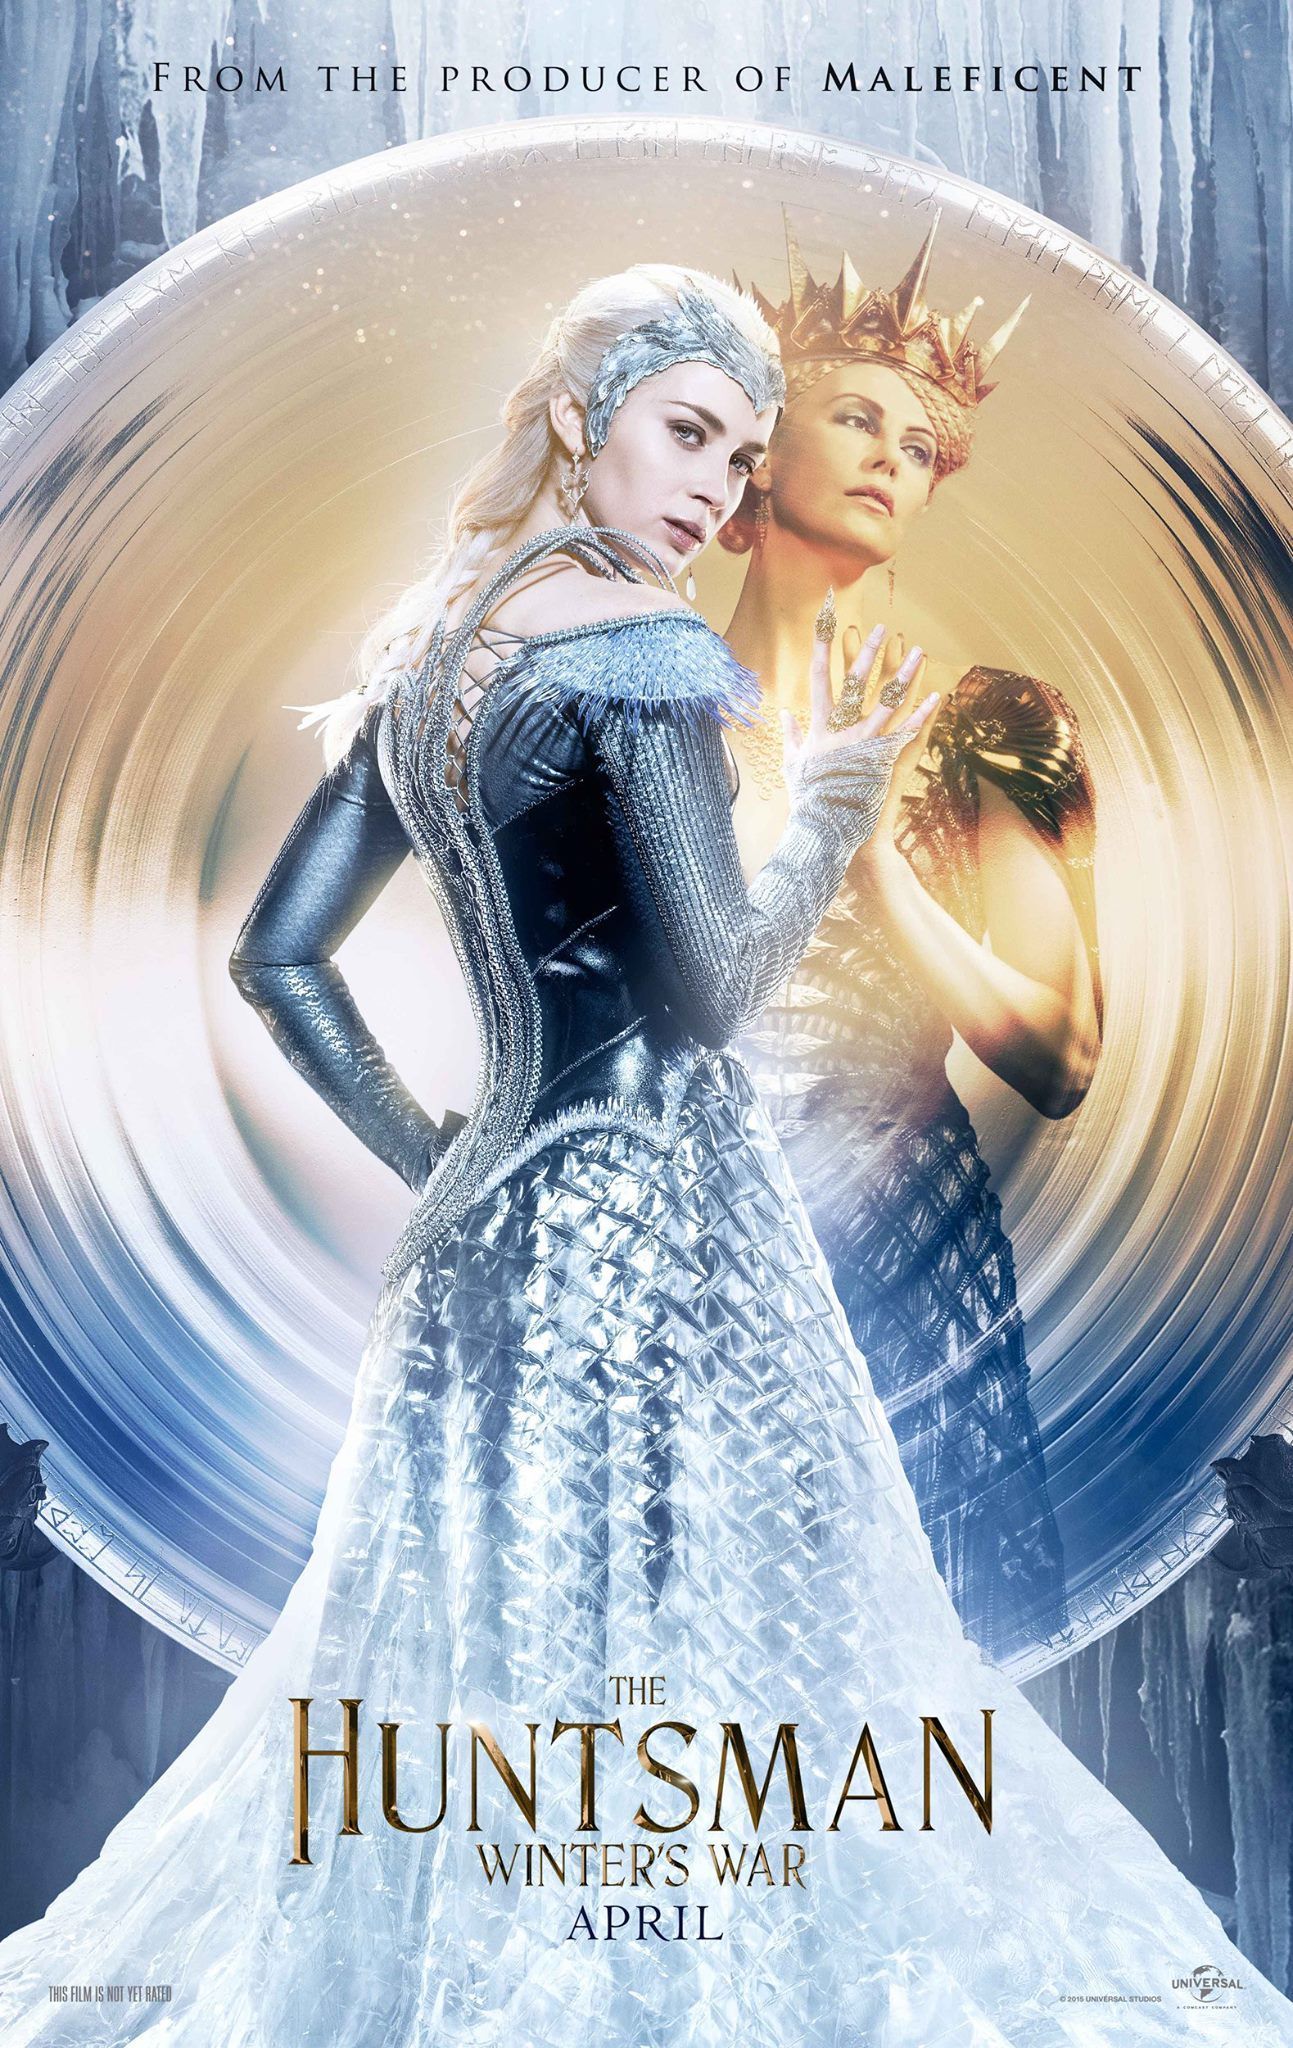 The Huntsman Poster - Emily Blunt and Charlize Theron